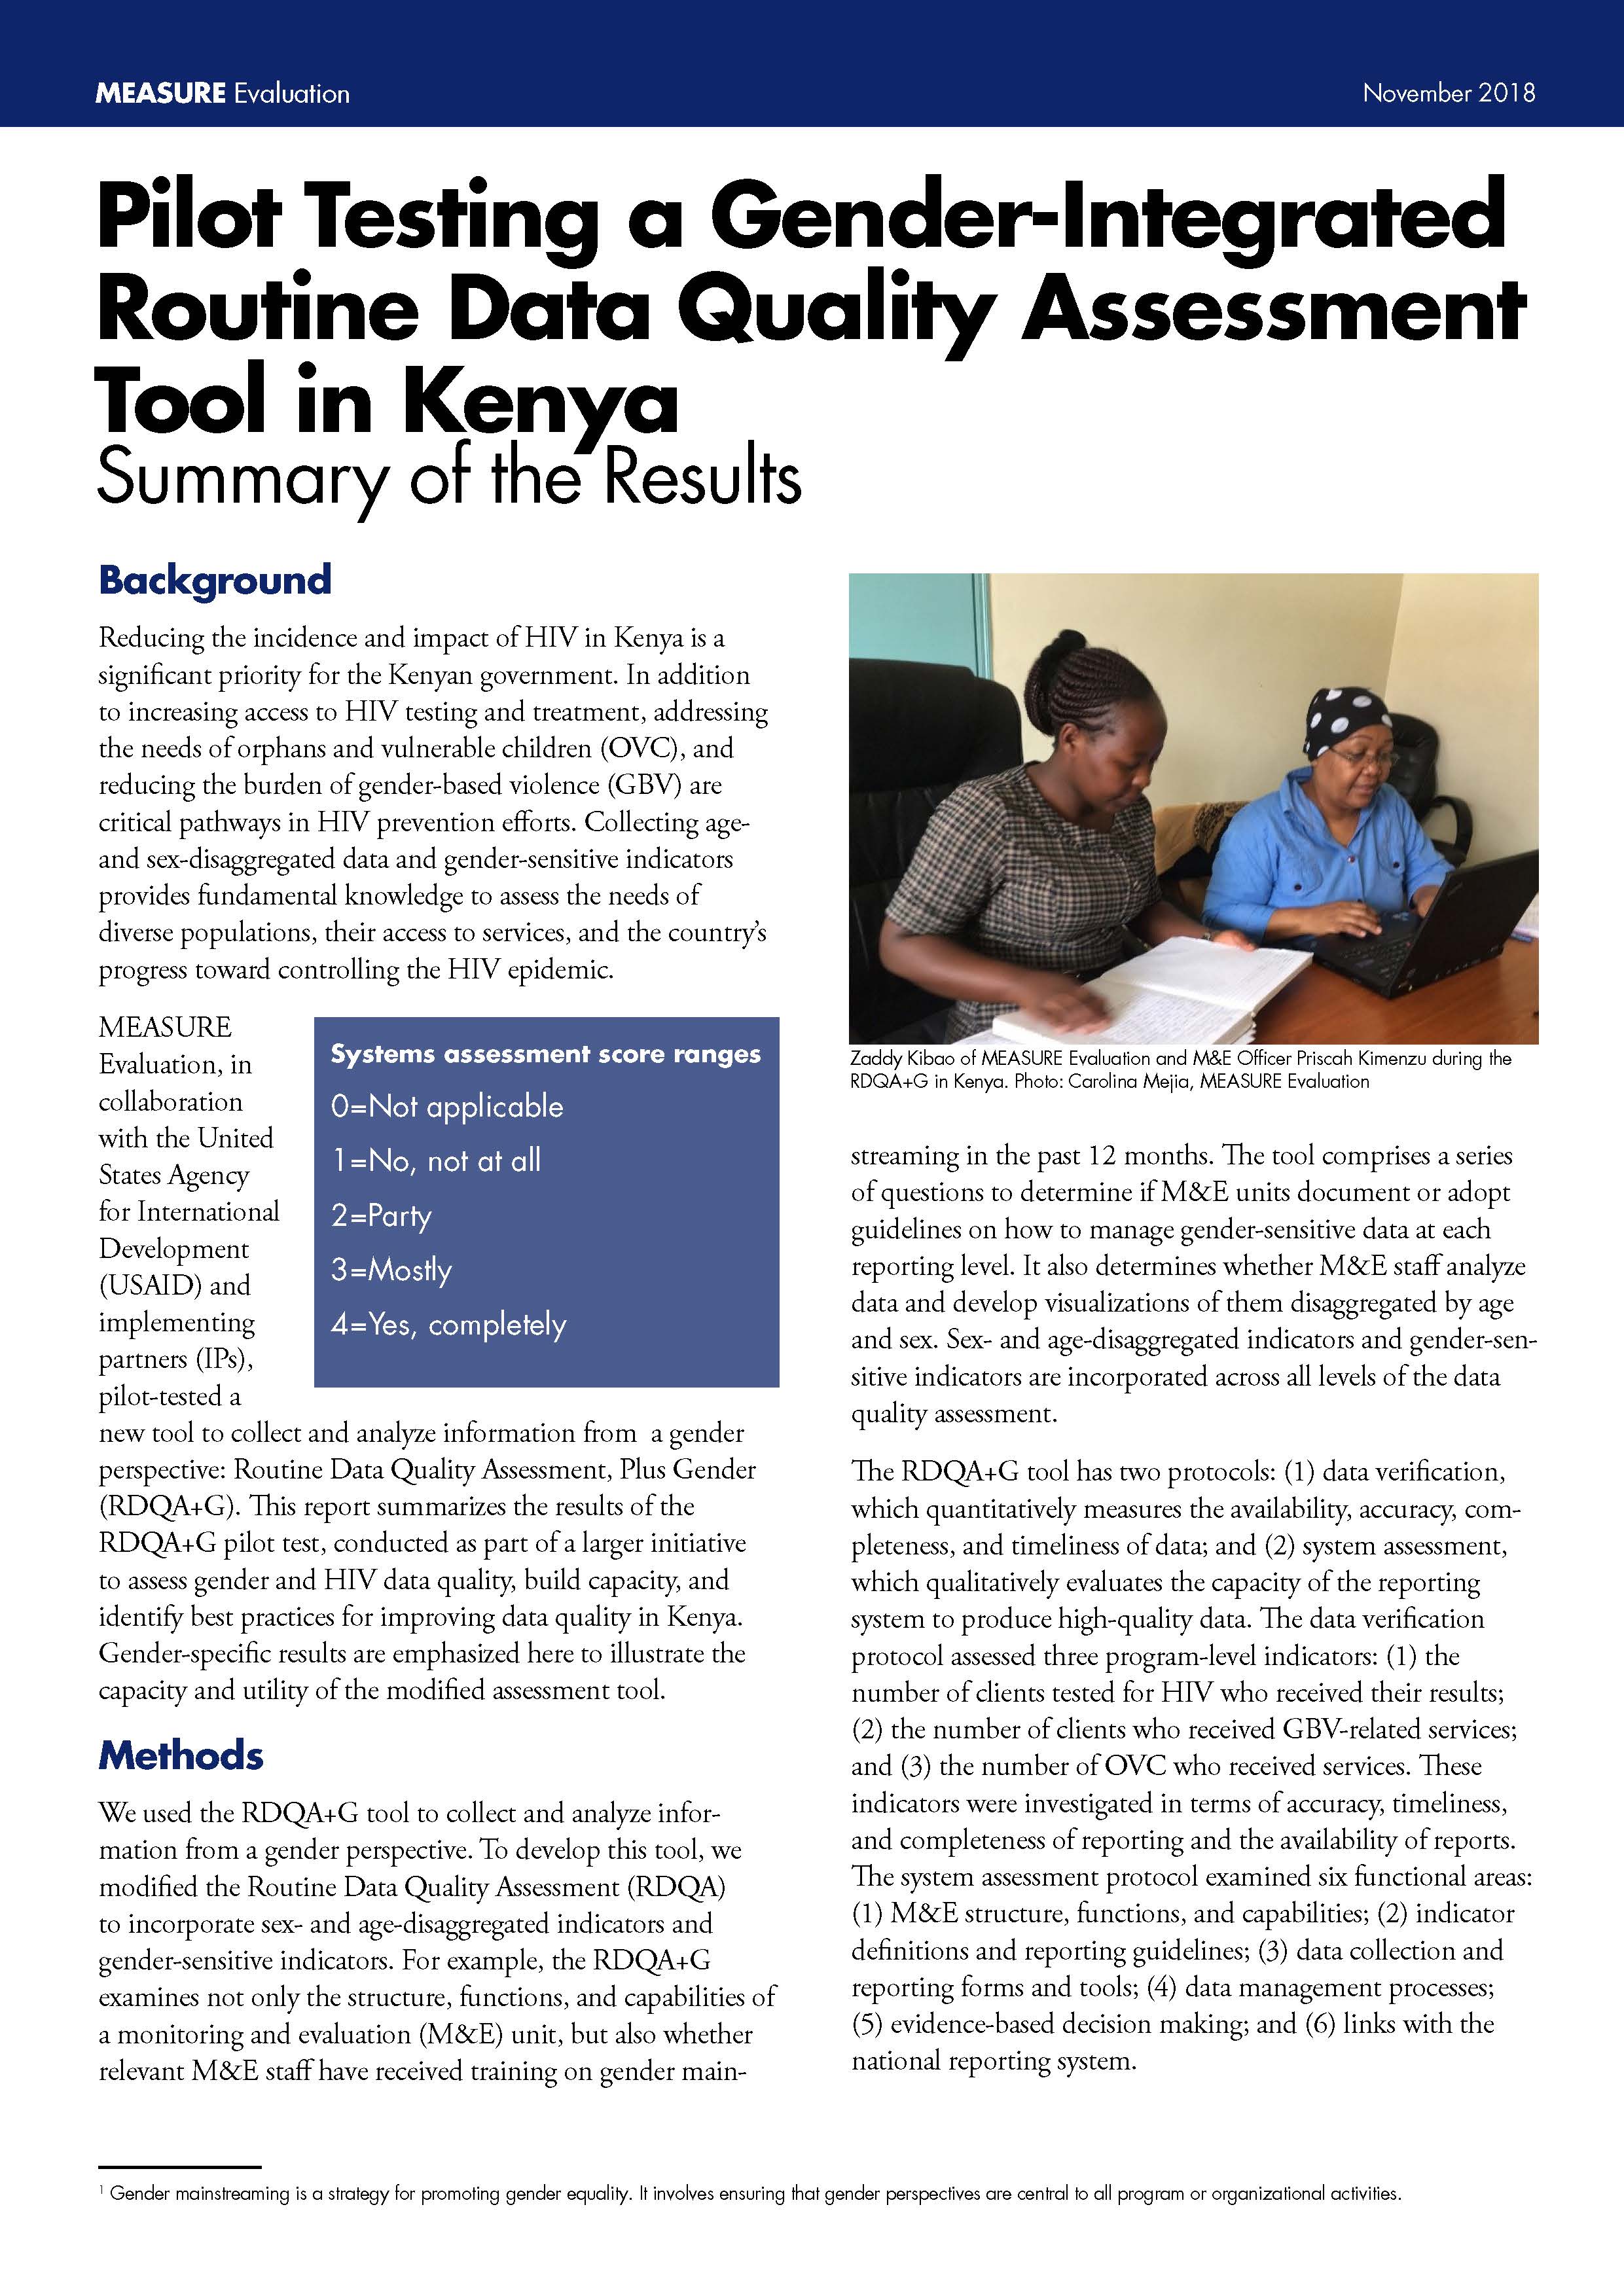 Pilot Testing a Gender-Integrated Routine Data Quality Assessment Tool in Kenya